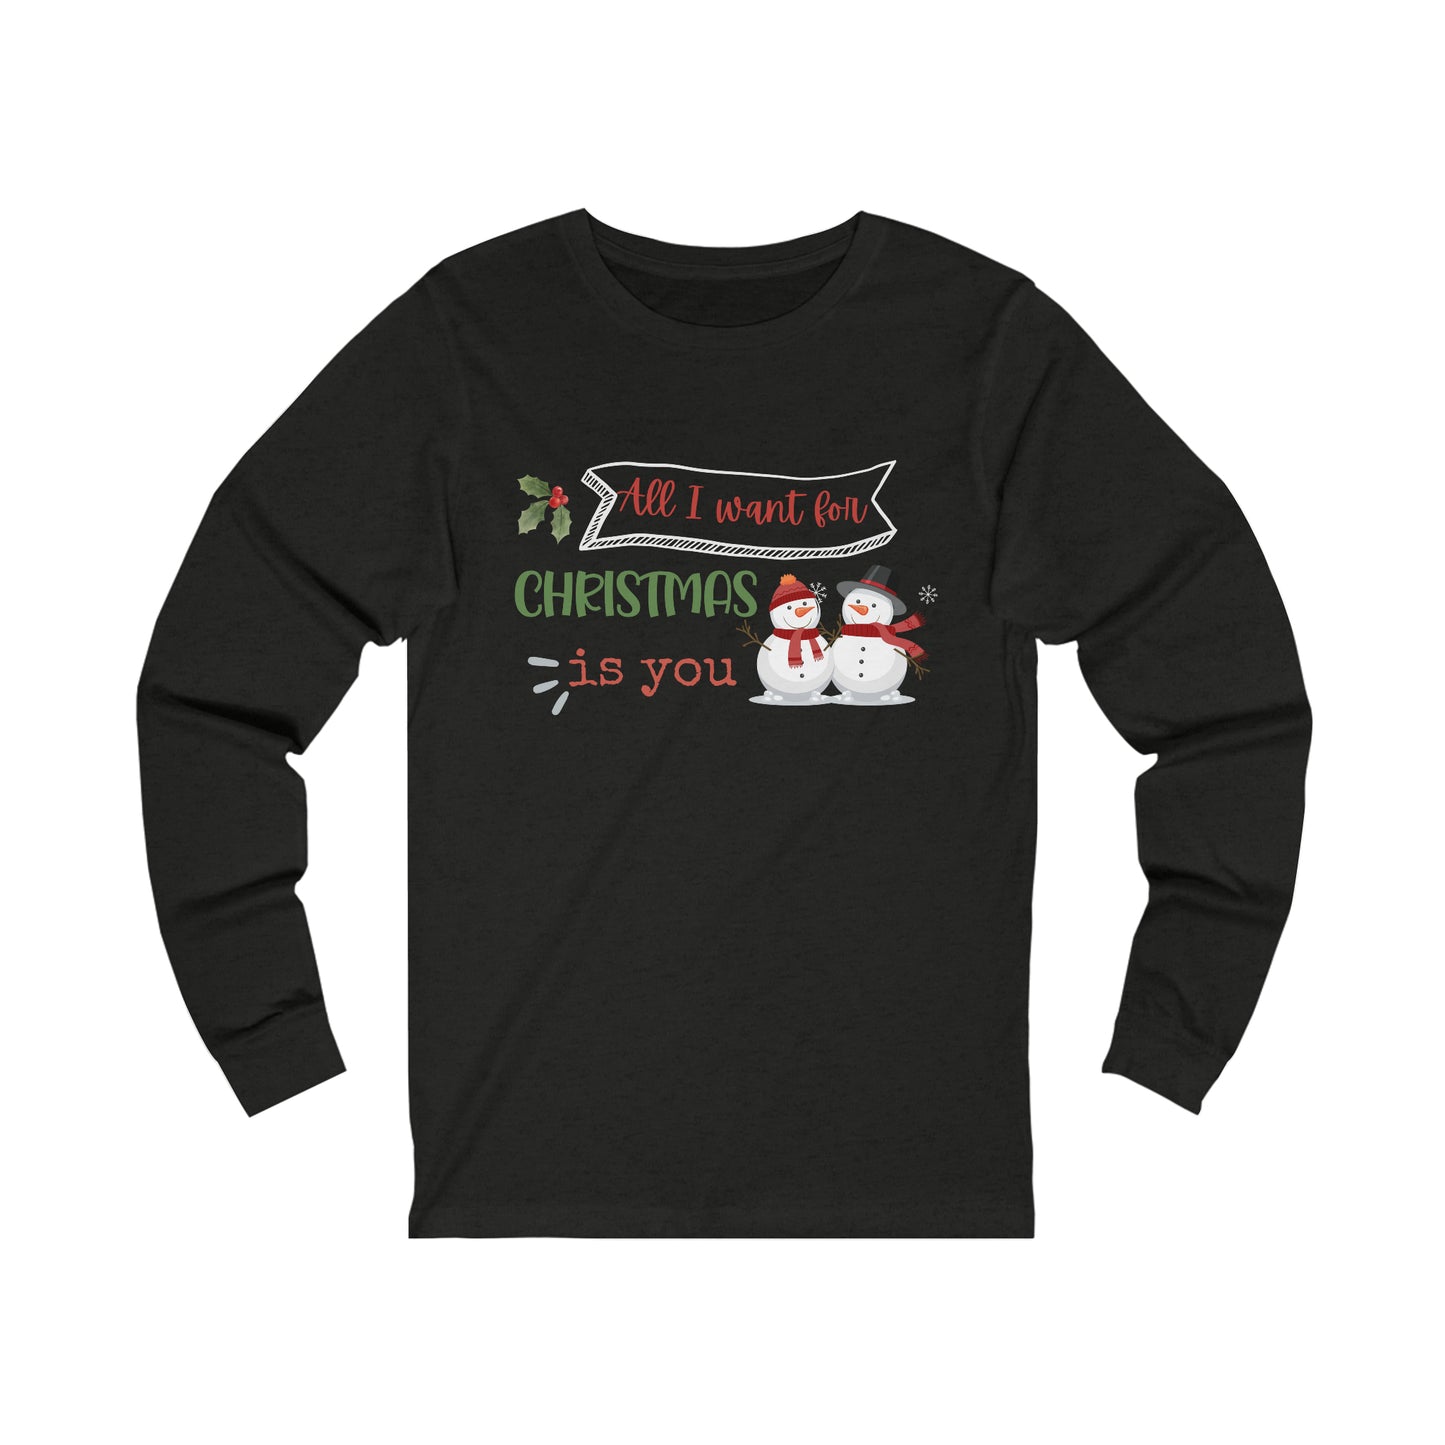 Unisex Jersey Long Sleeve Tee, All I want for Christmas is you